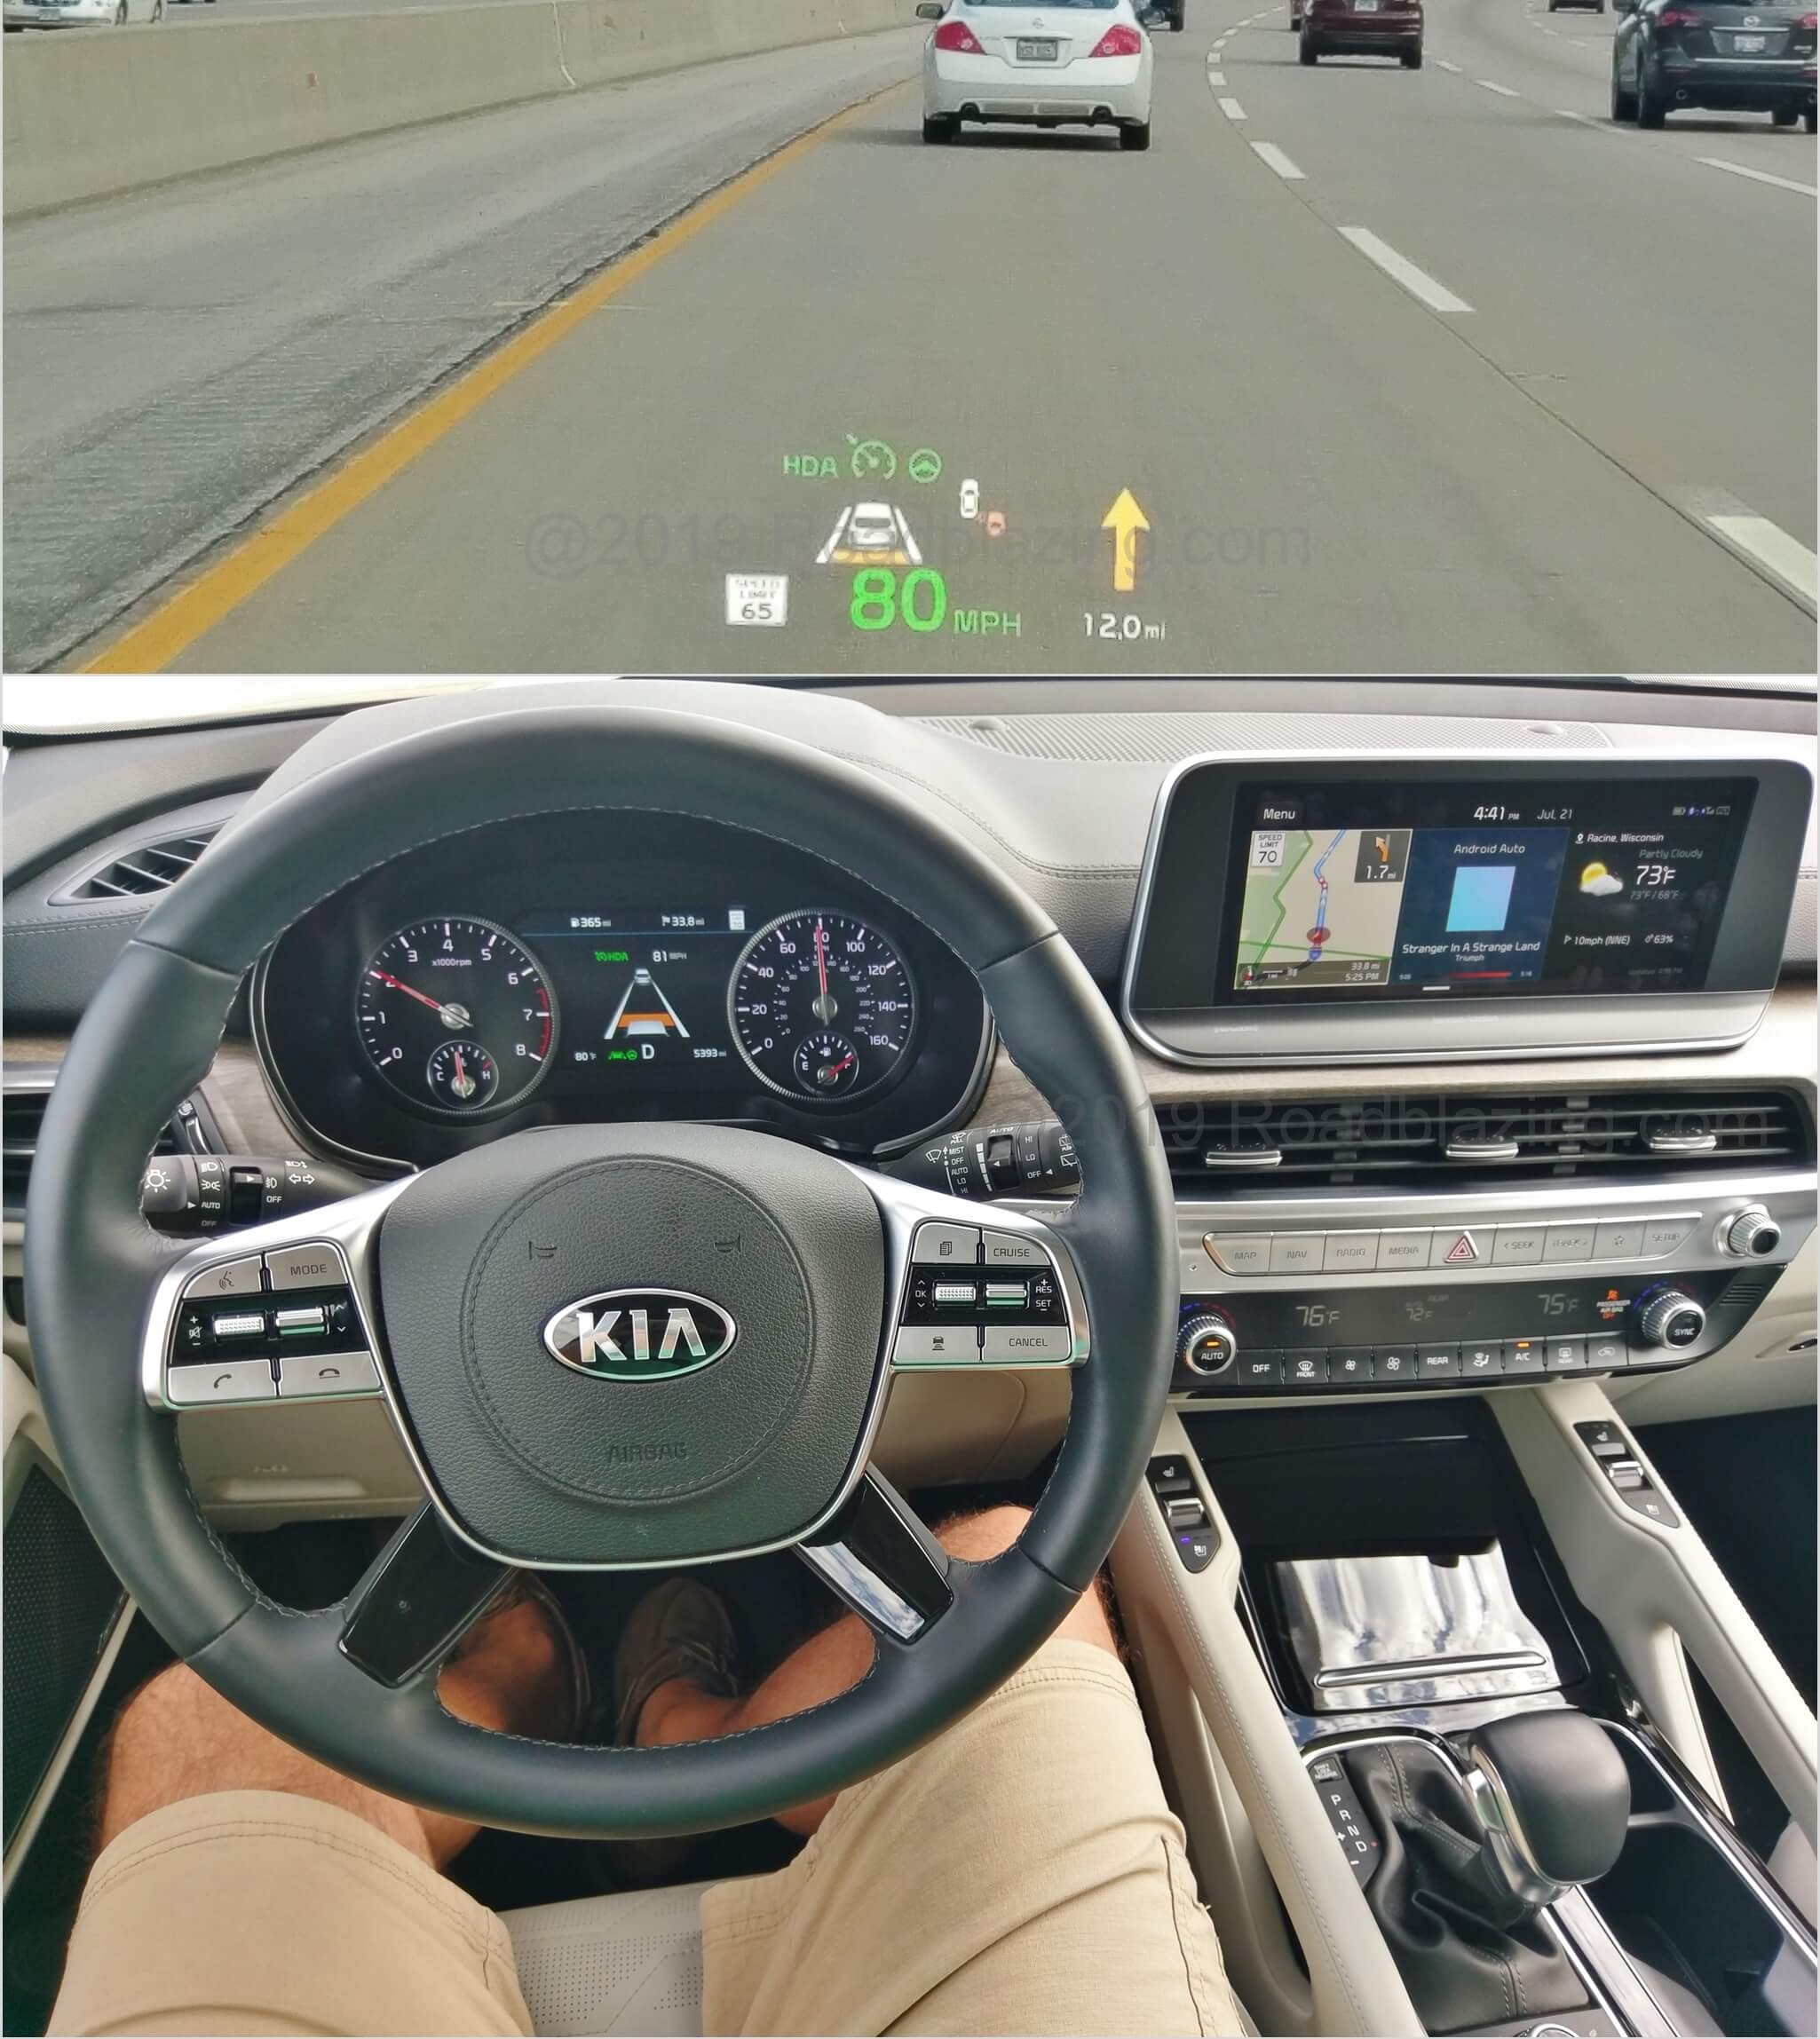 2020 Kia Telluride SX AWD: variable color, high contrast large font, informative Heads Up Display (HUD)